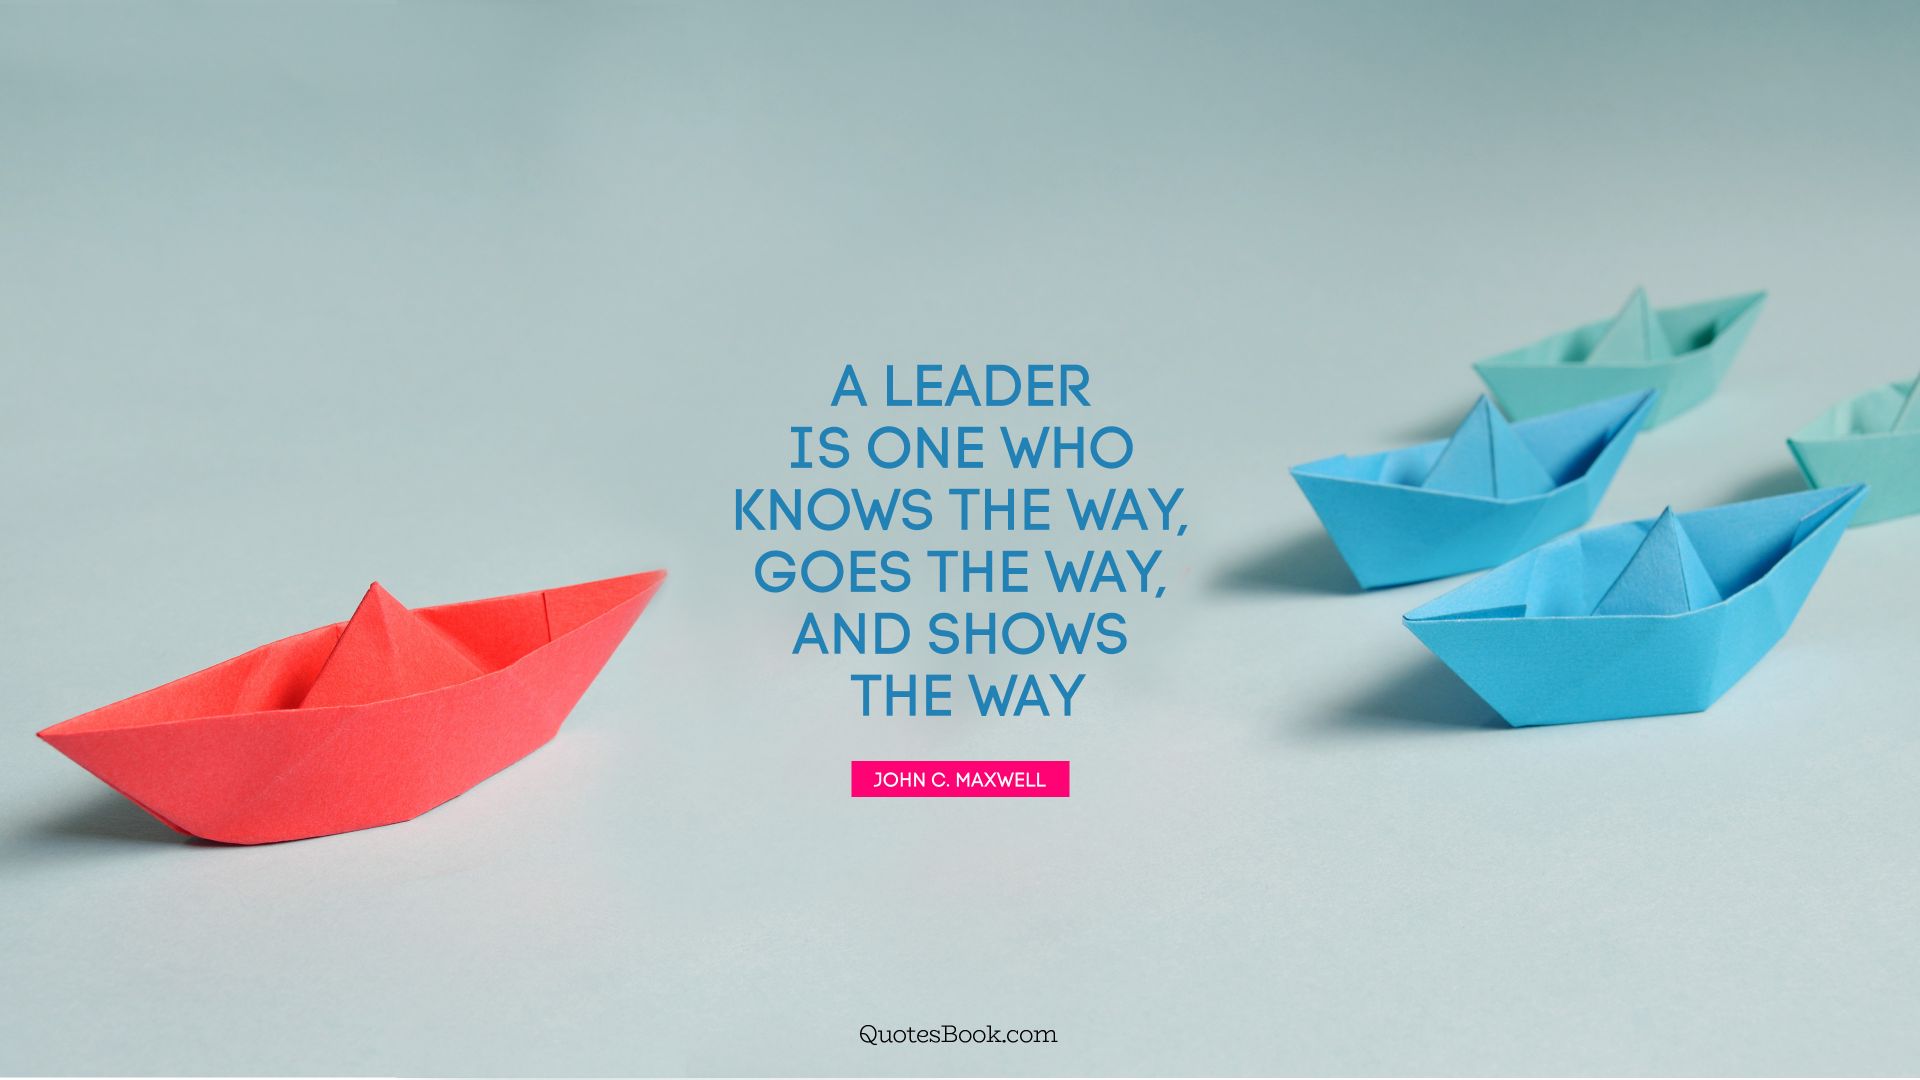 A leader is one who knows the way, goes the way, and shows the way. - Quote by John C. Maxwell